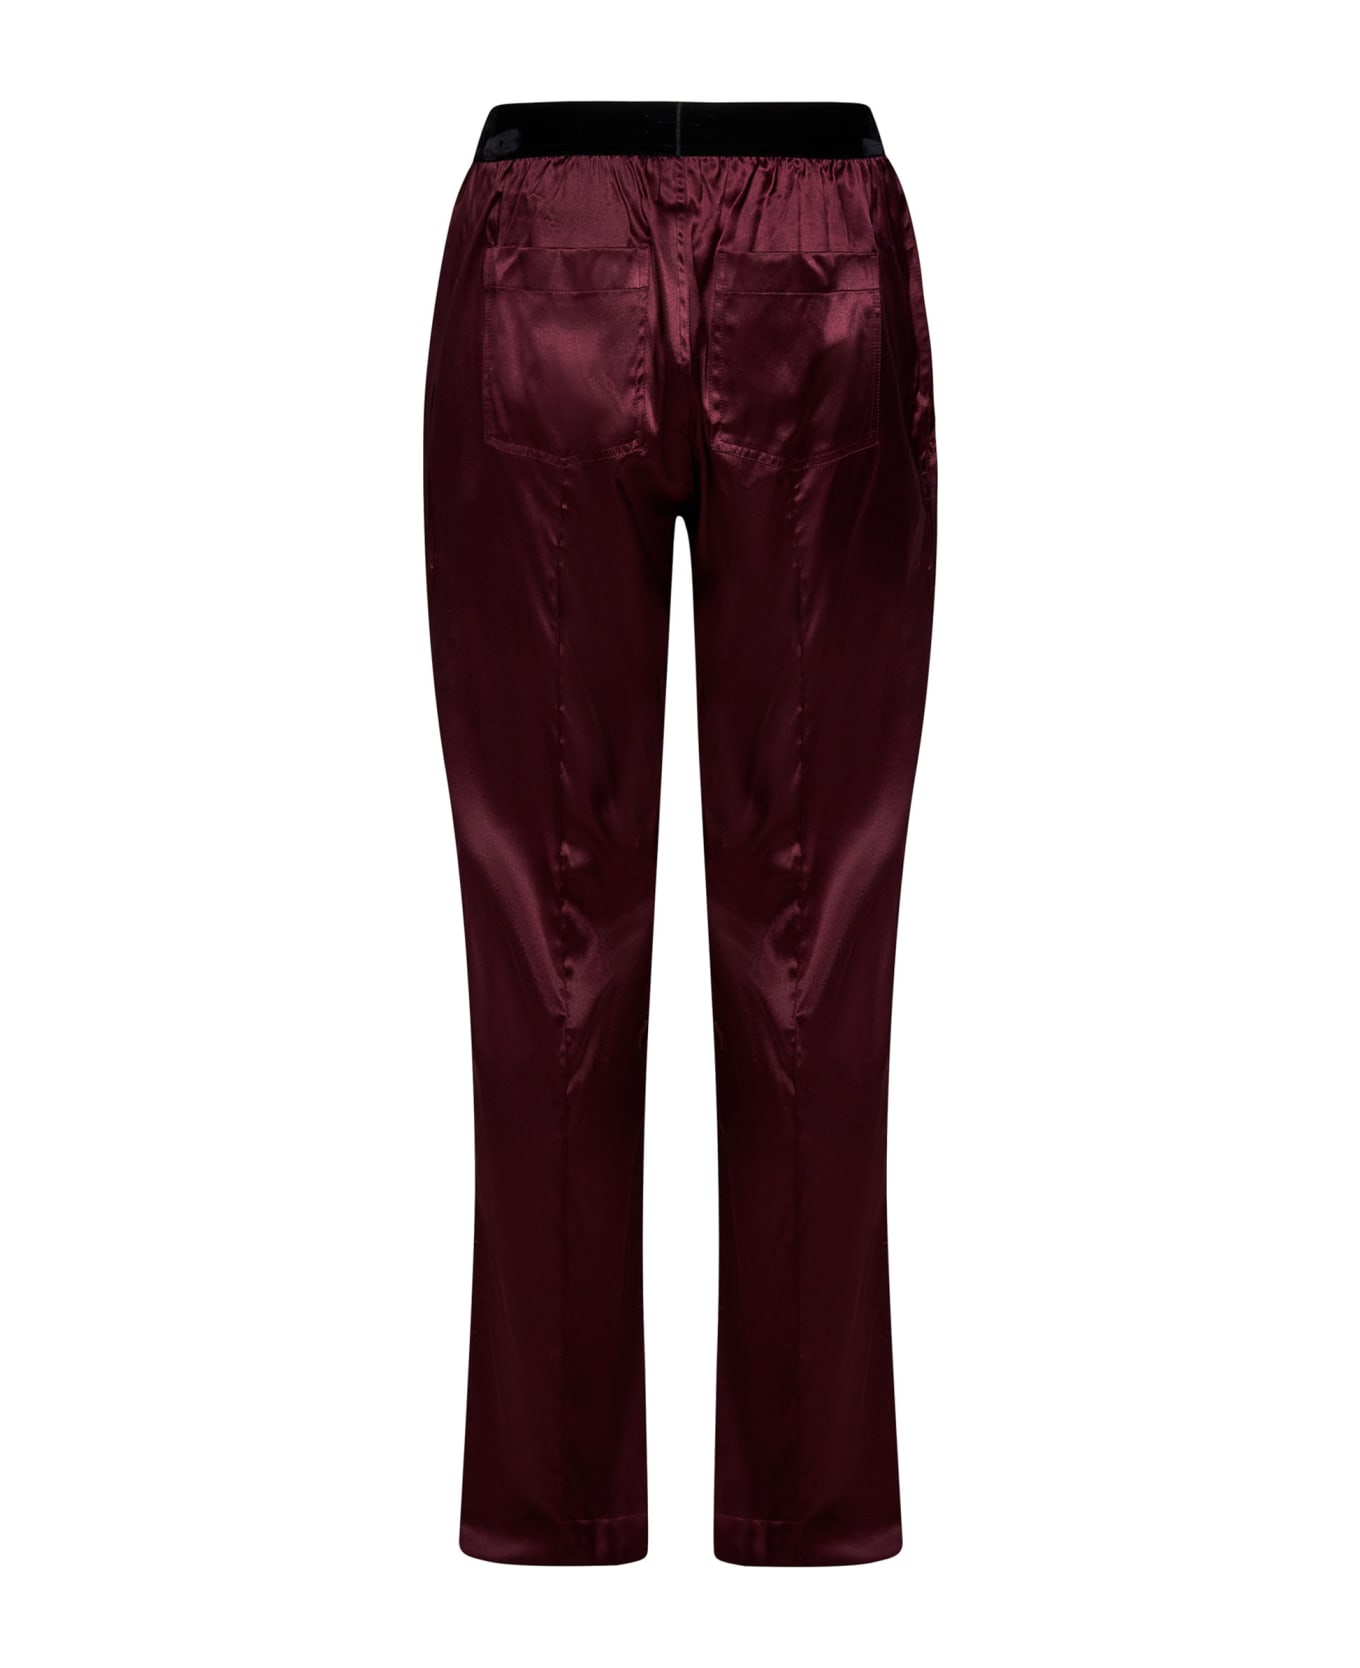 Tom Ford Trousers - Bordeaux